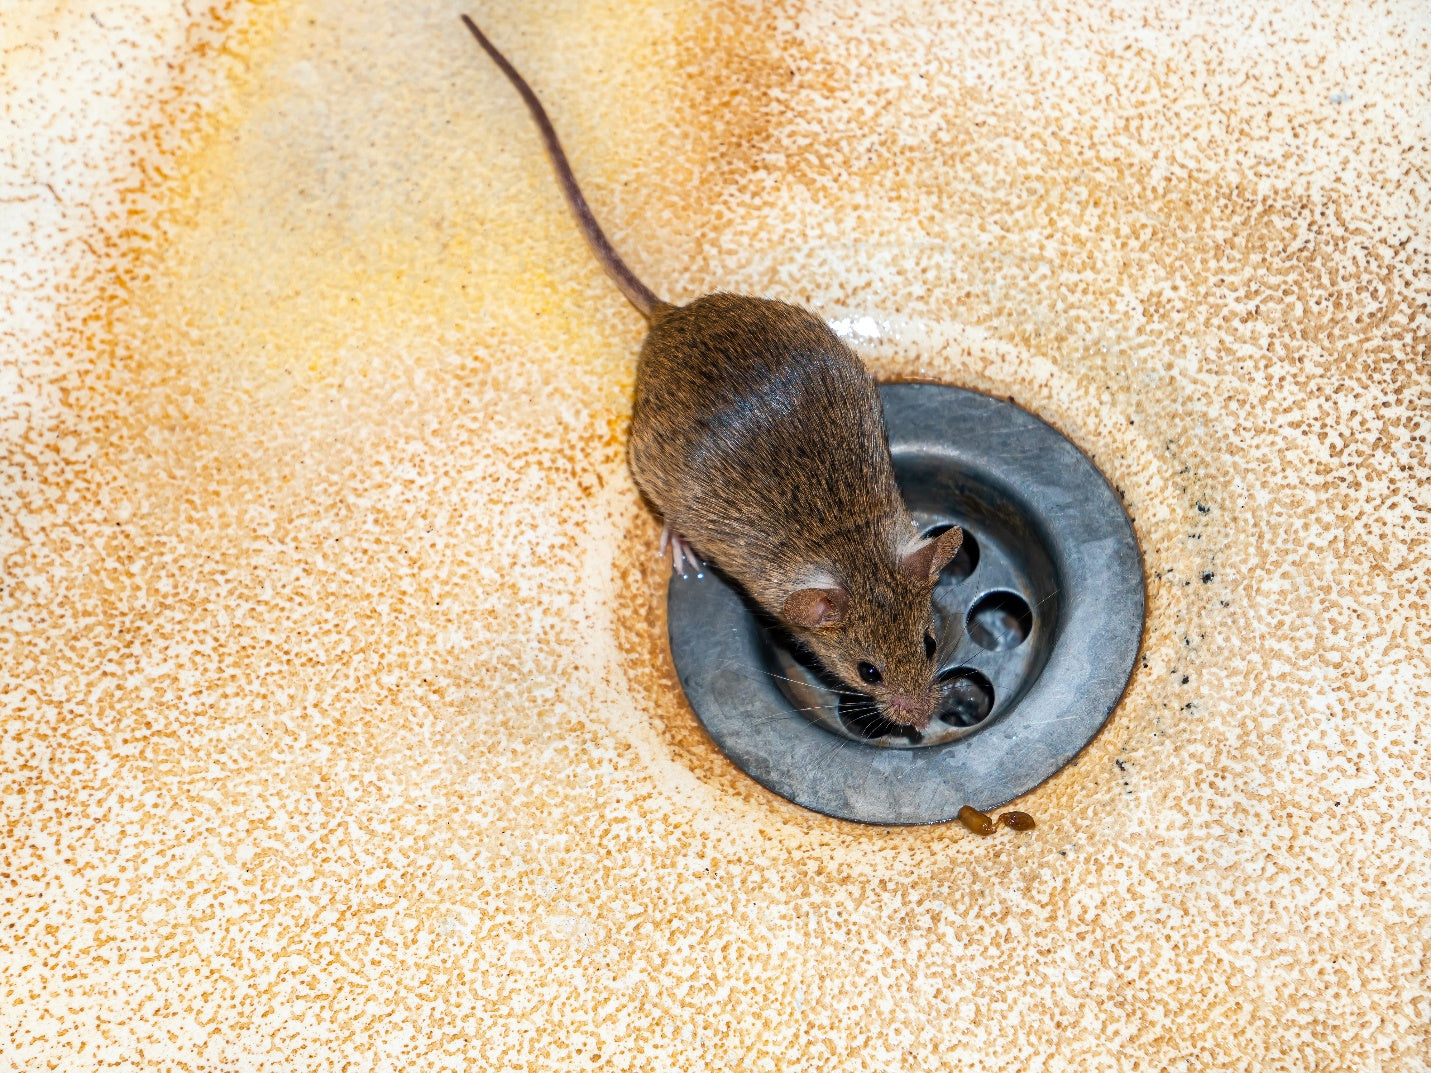 How to get rid of mice